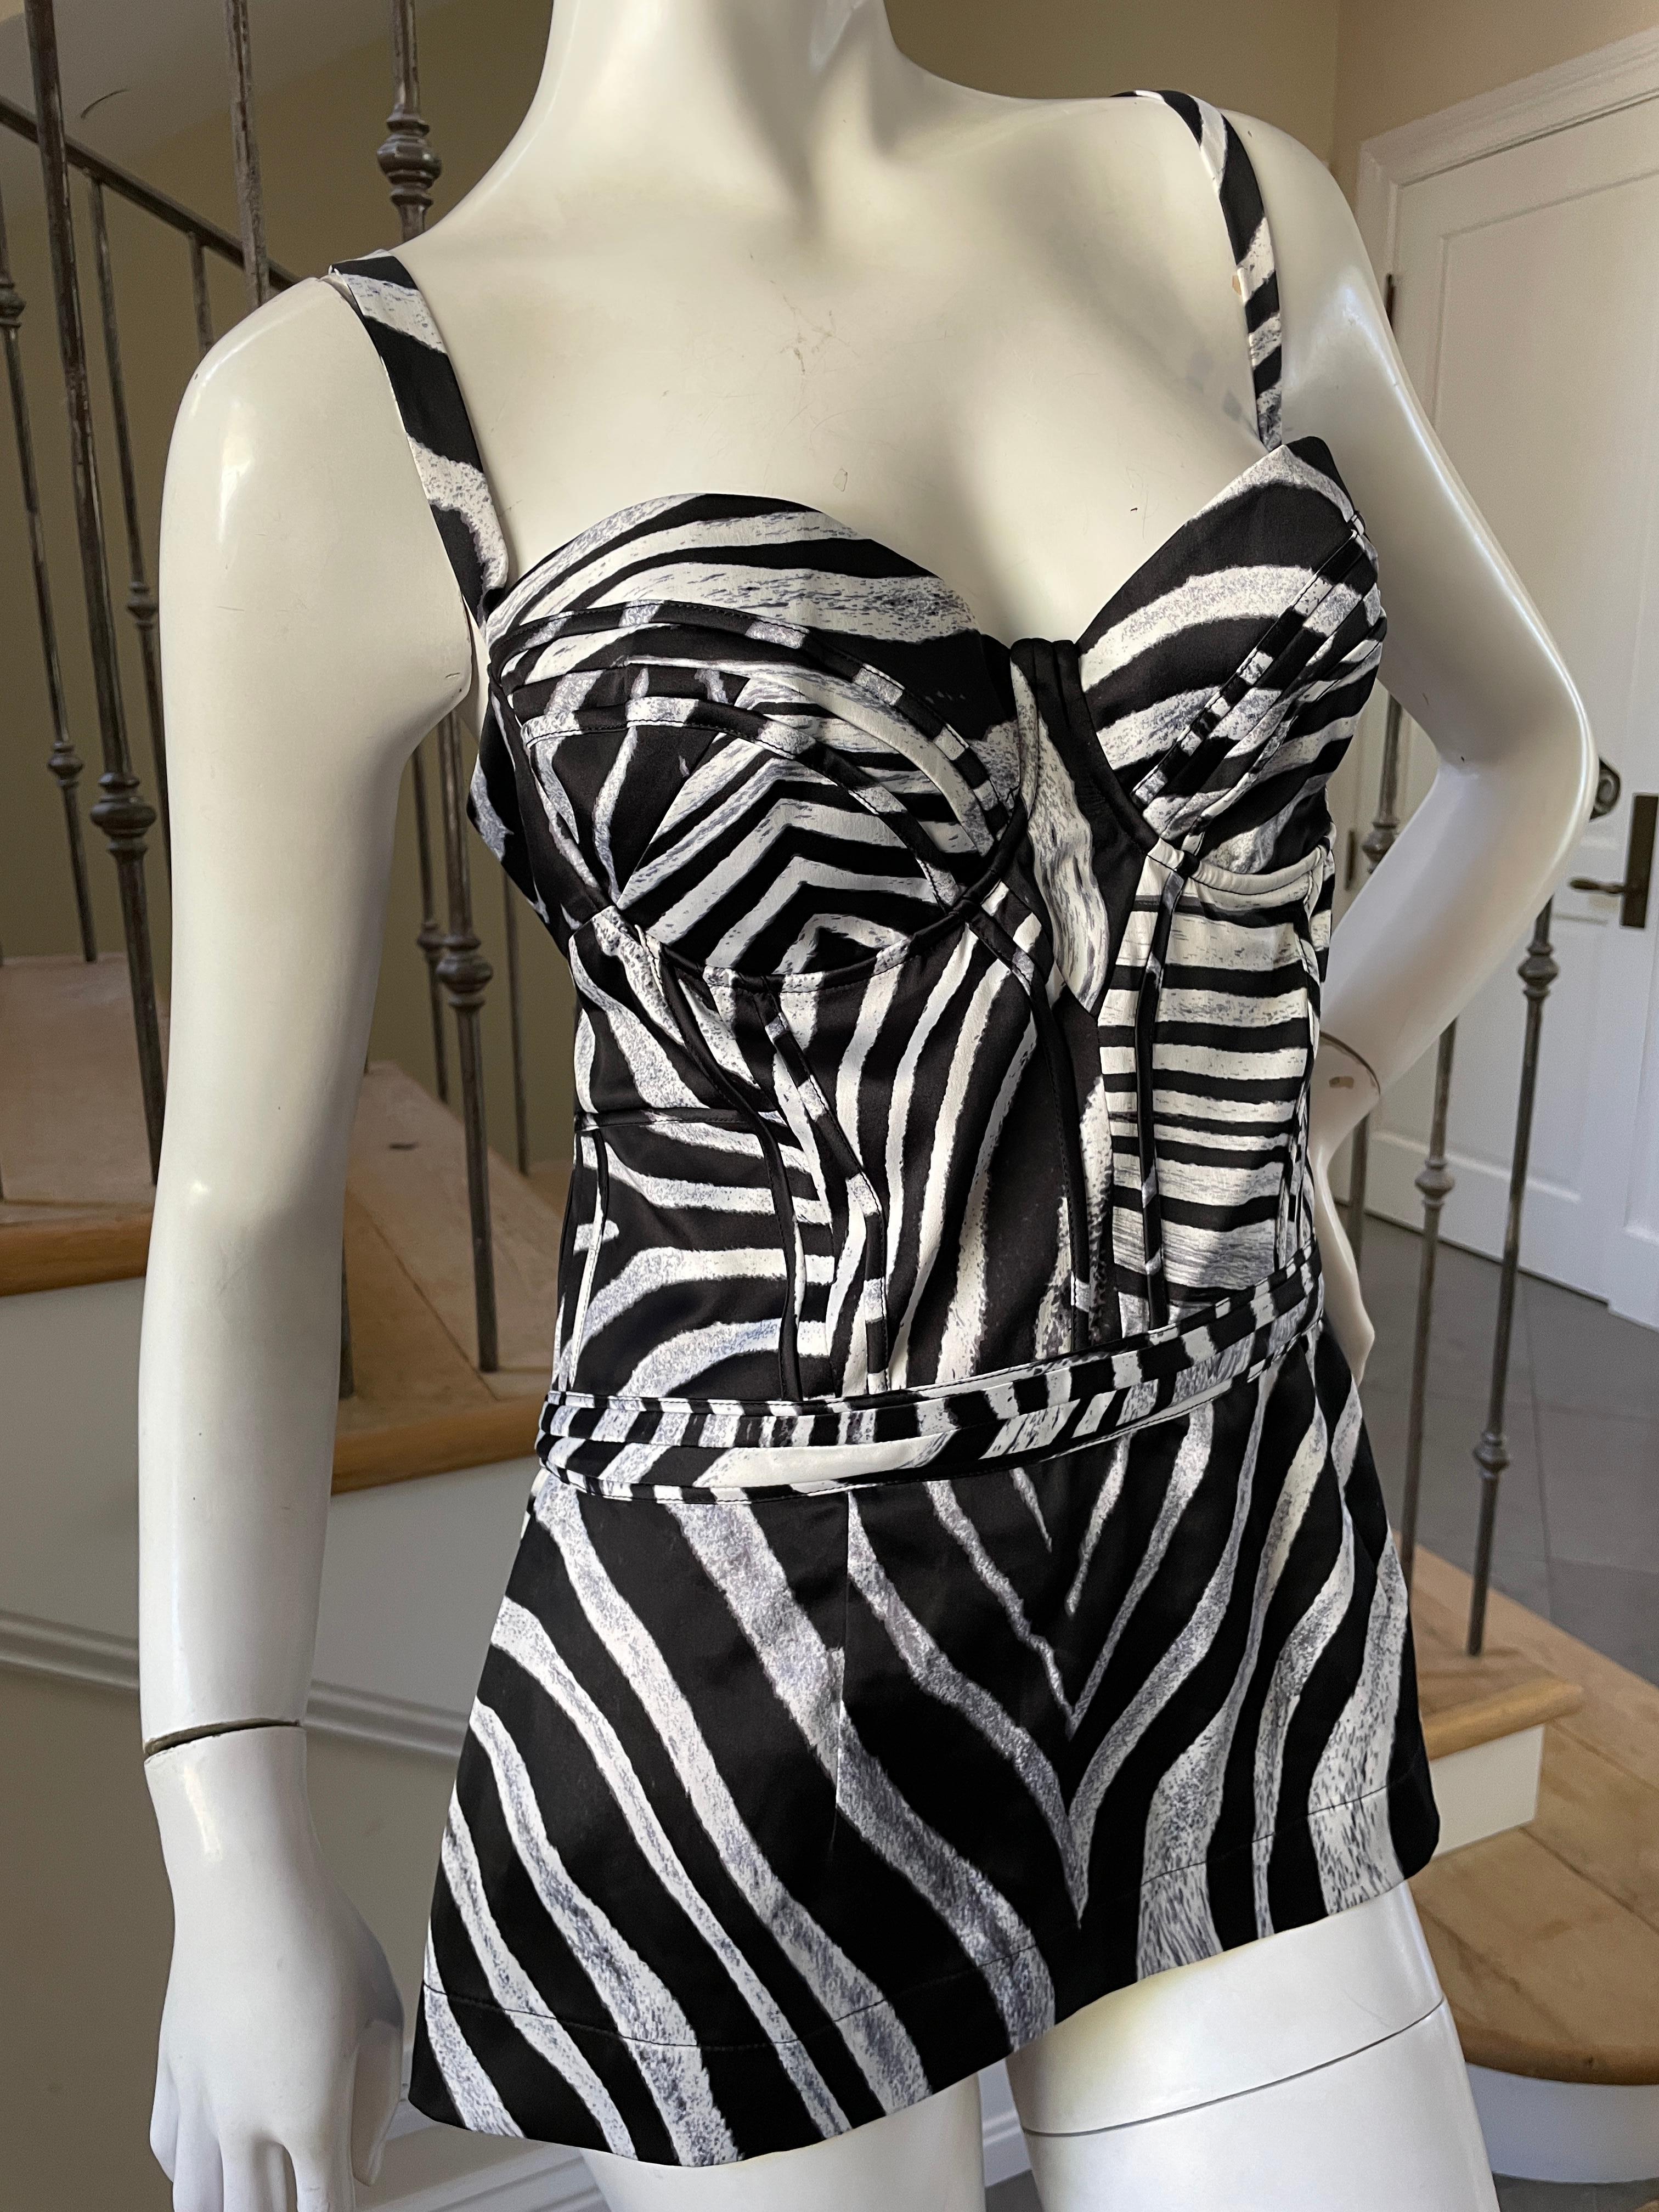 Just Cavalli Zebra Print Corset by Roberto Cavalli Hard to FInd Size 48 In Excellent Condition For Sale In Cloverdale, CA